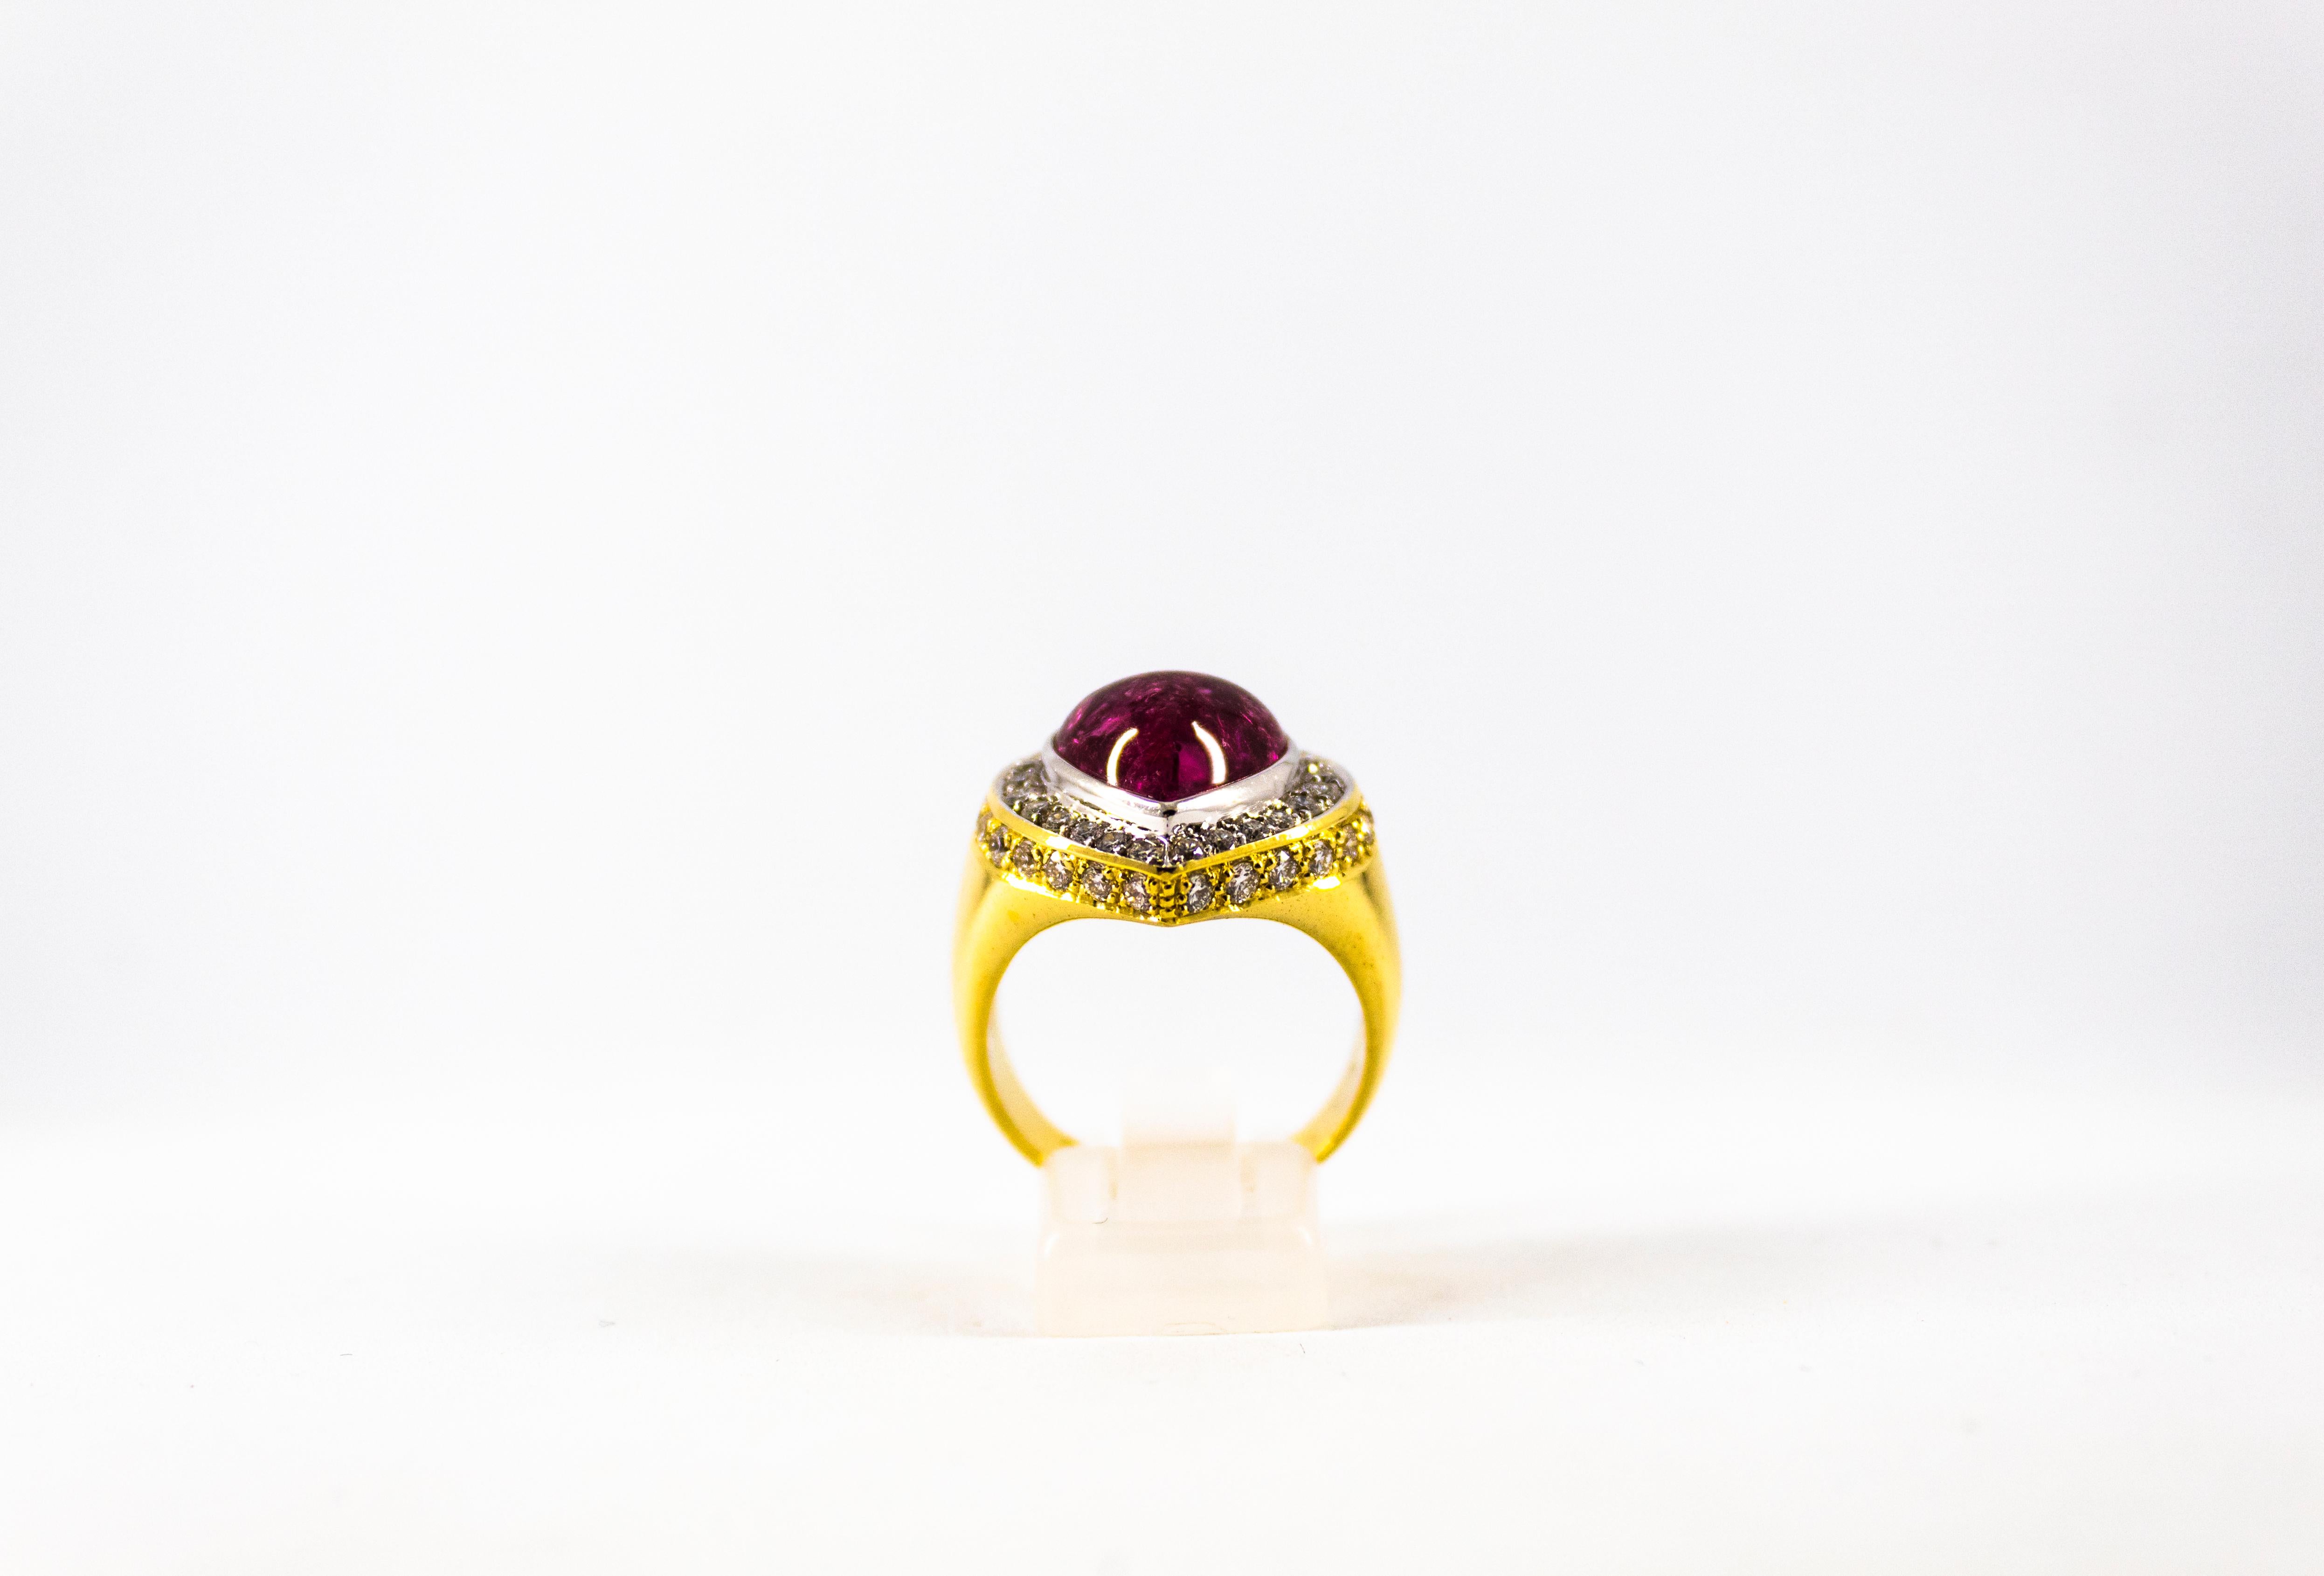 This Ring is inspired by Renaissance Style.
This Ring is made of 18K Yellow Gold.
This Ring has 1.40 Carats of White Diamonds.
This Ring has a 6.00 Carats Pink Tourmaline.
Size ITA: 20 USA: 9
We're a workshop so every piece is handmade, customizable